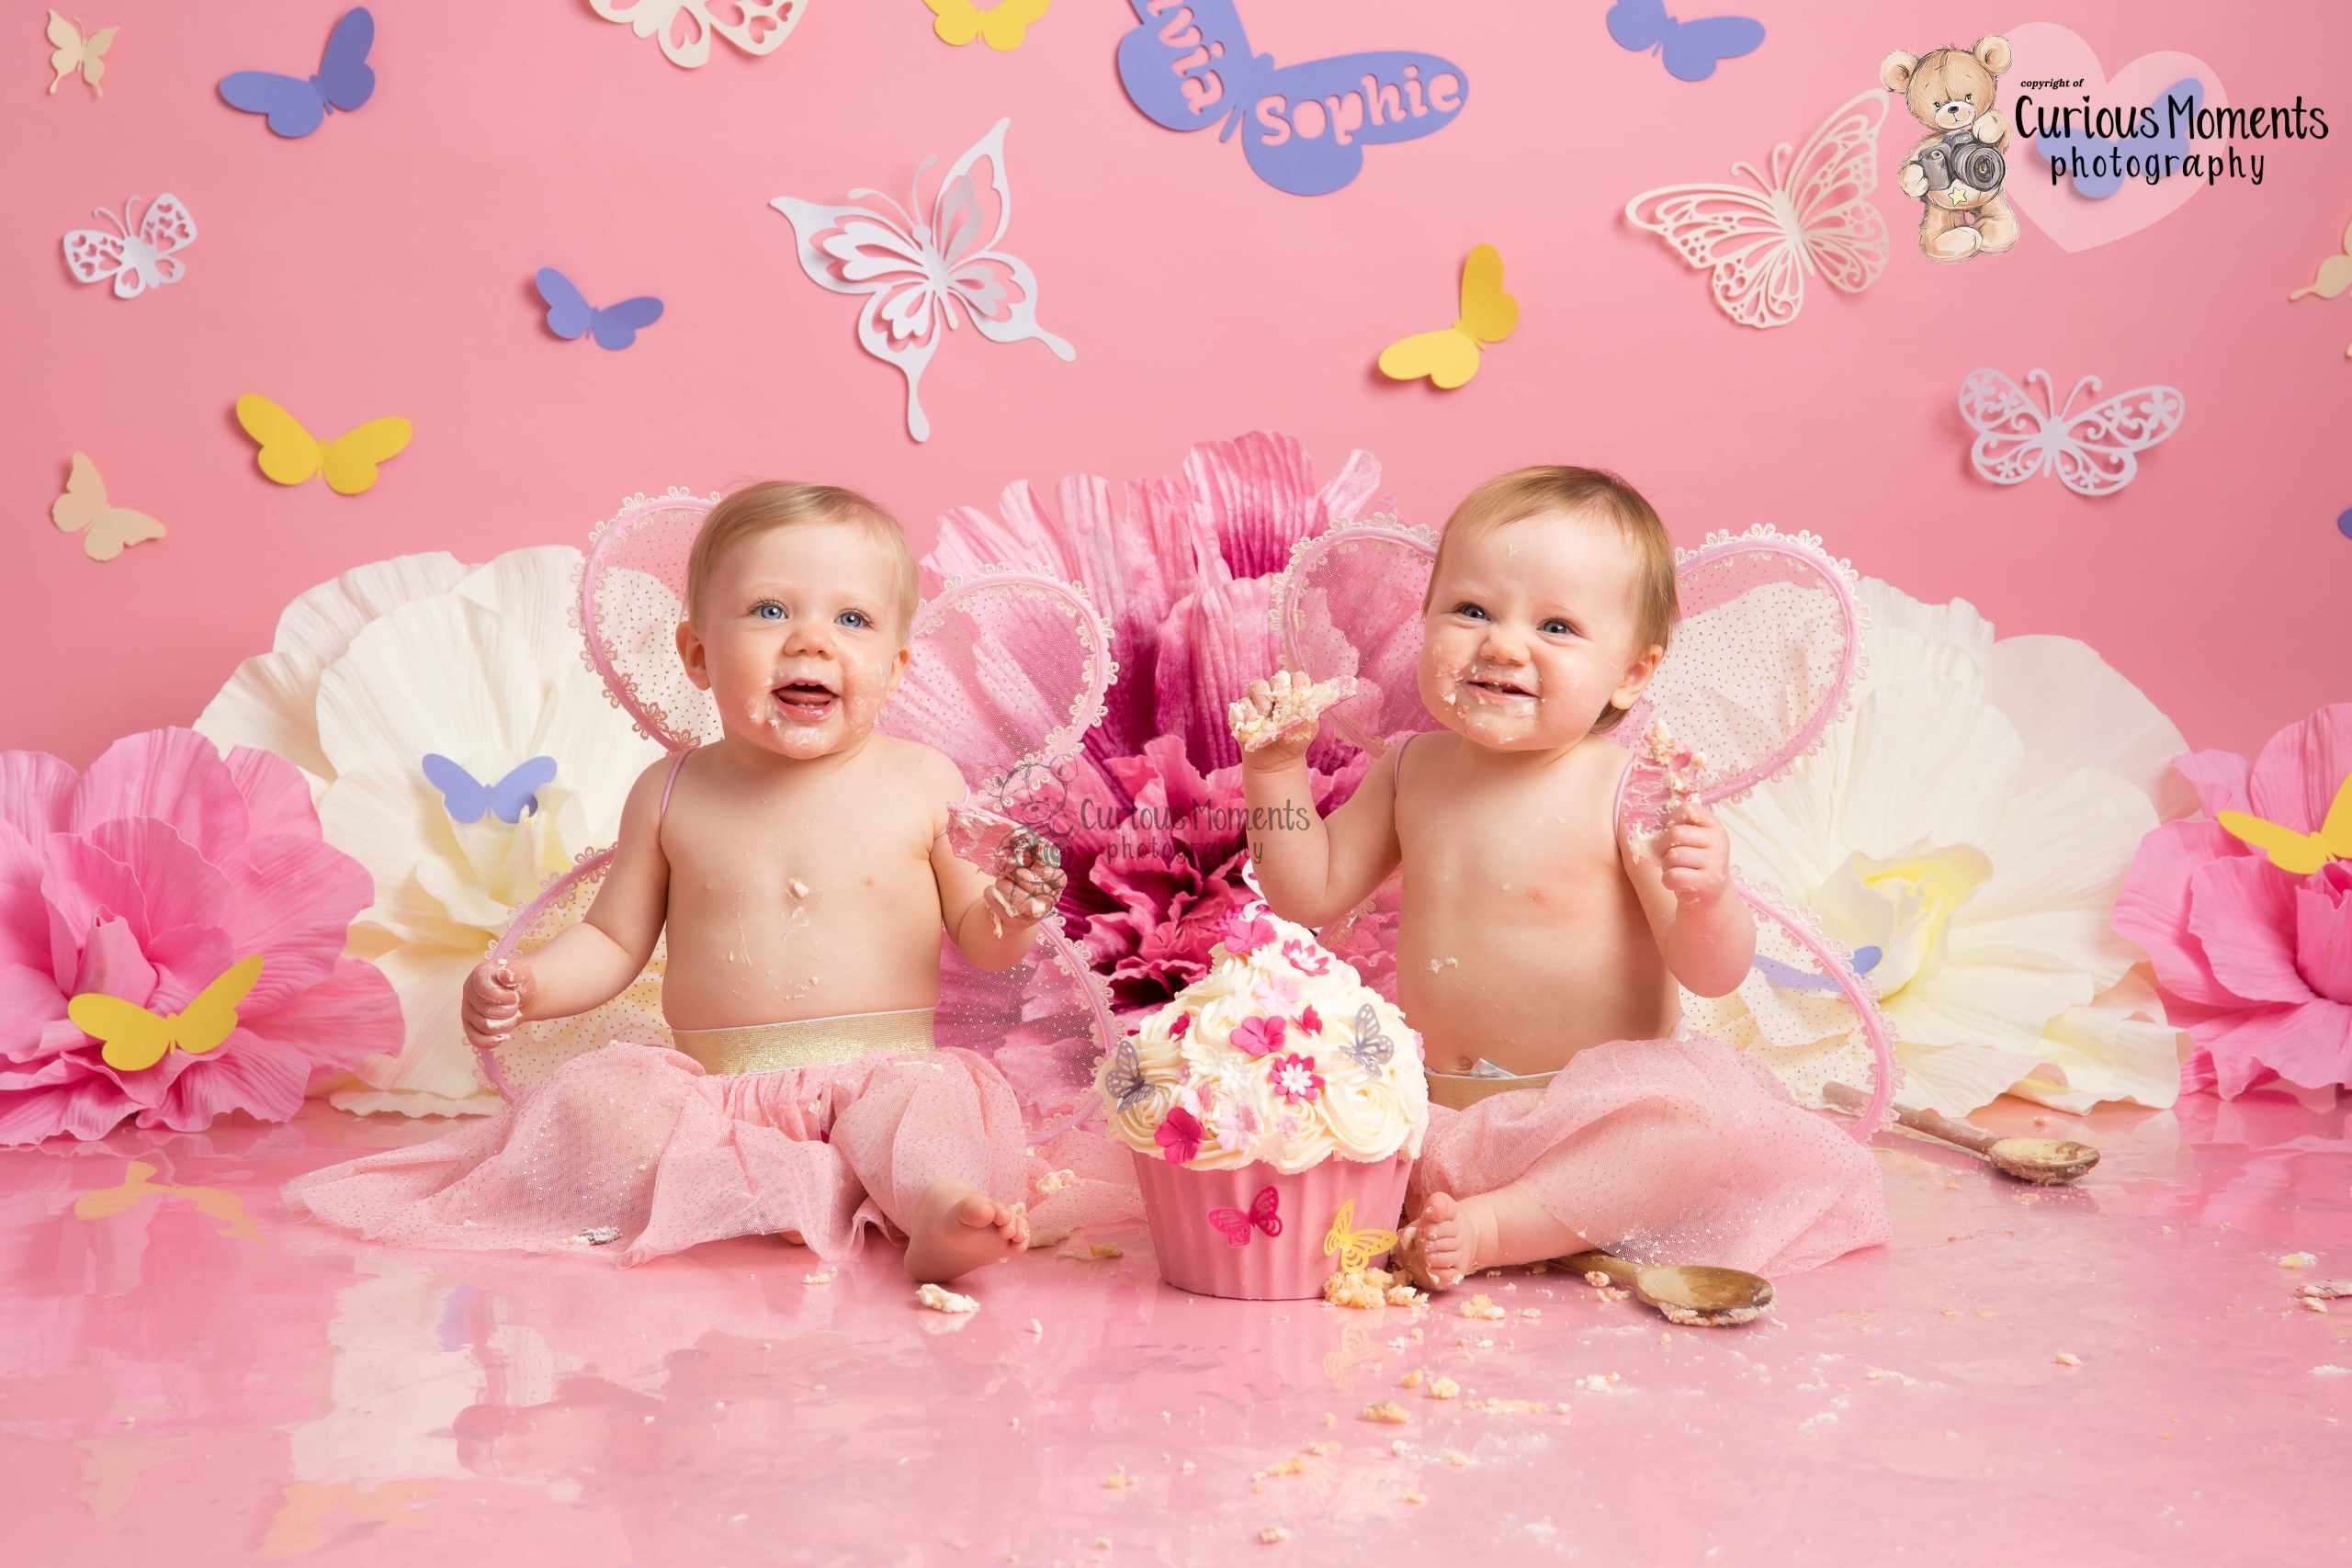 Twin girls cake smash on pink background with flowers and butterflies